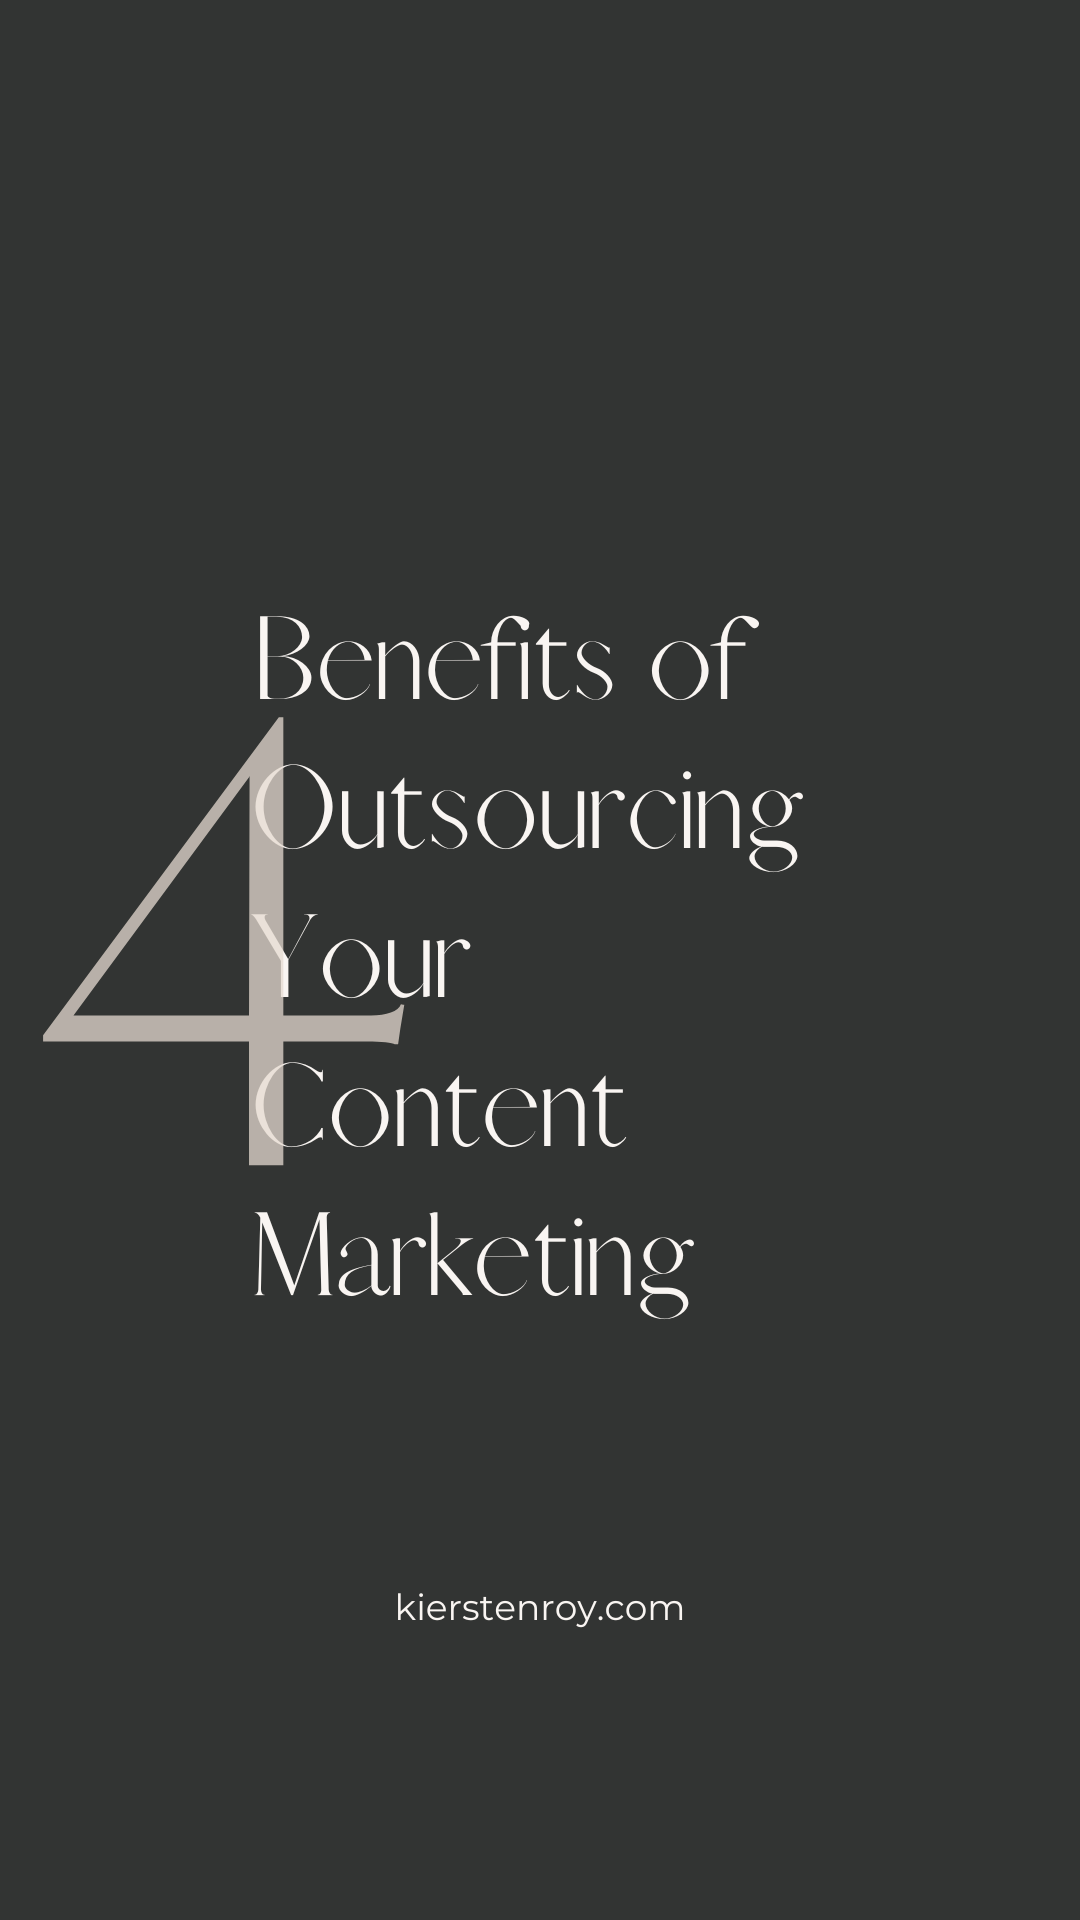 4 Benefits of Outsourcing Your Content Marketing